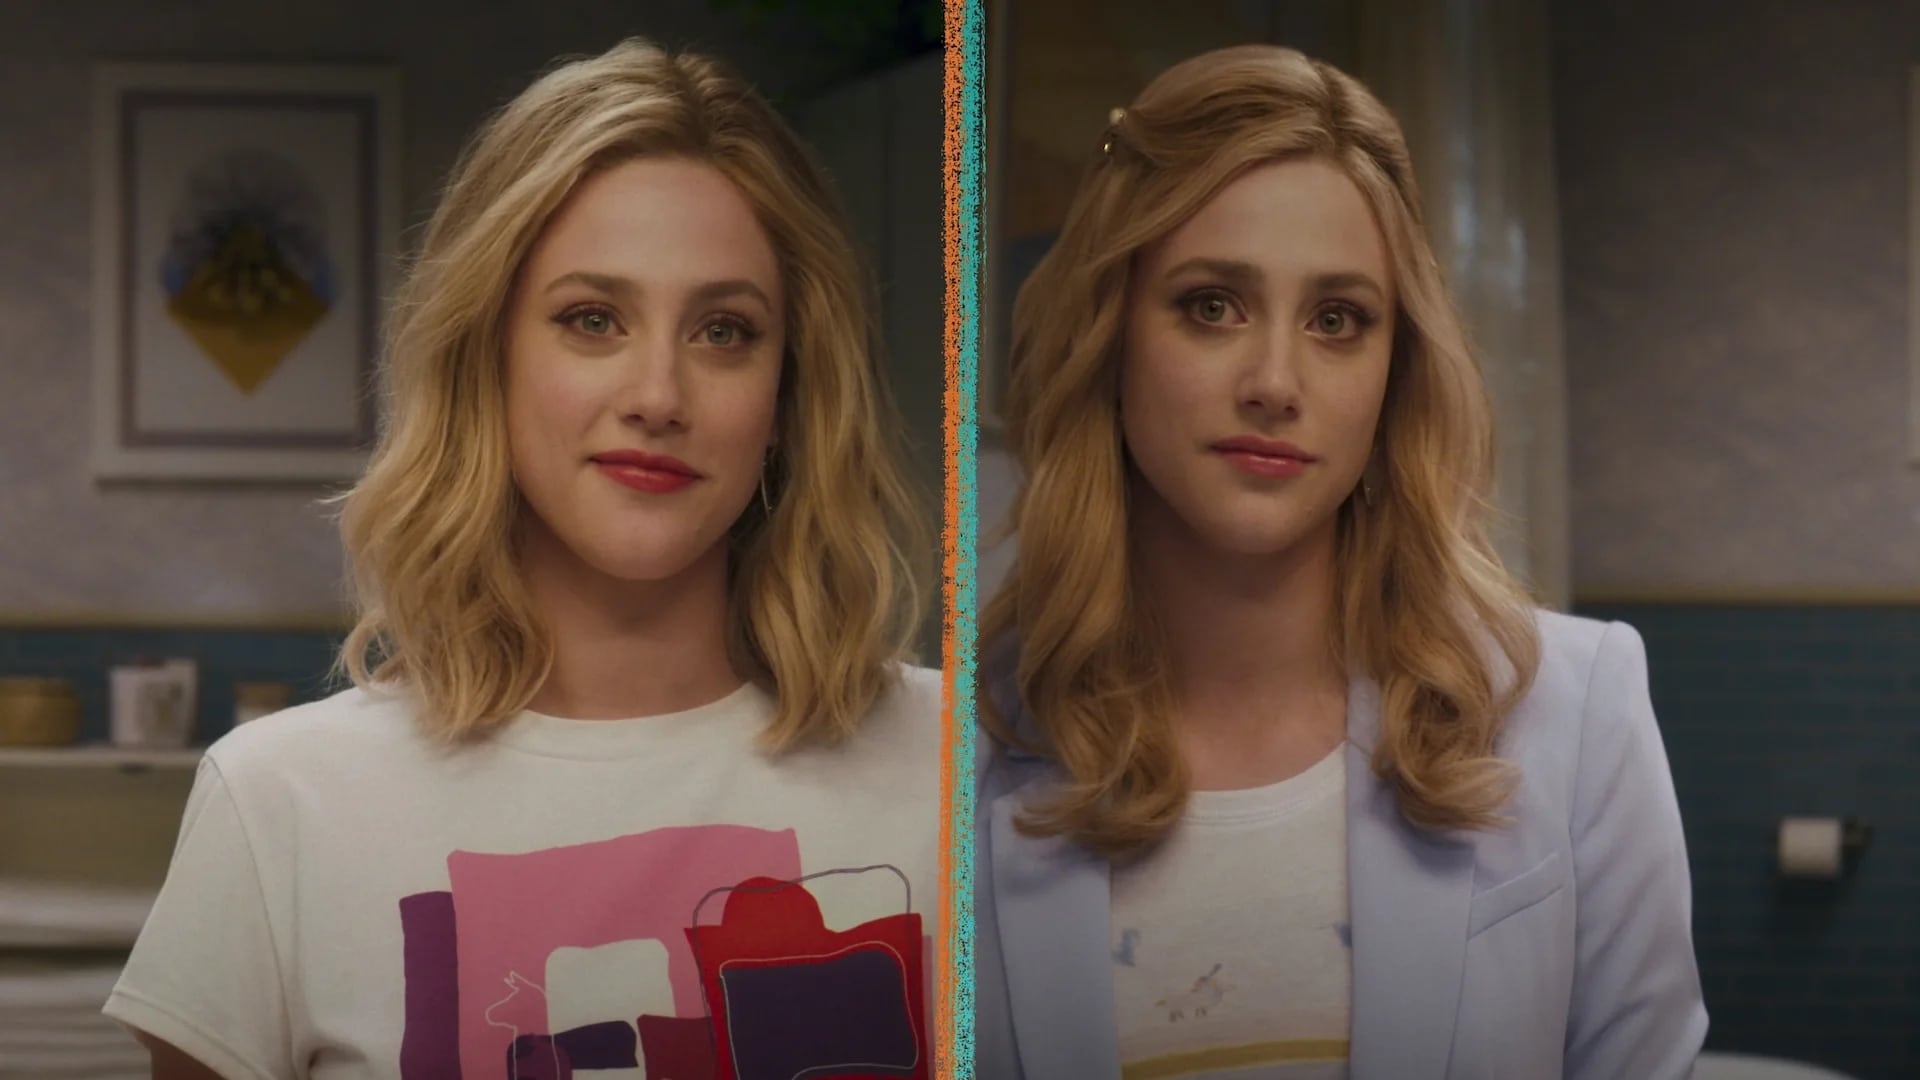 Lili Reinhart plays two different lives in the Netflix Original Look Both Ways